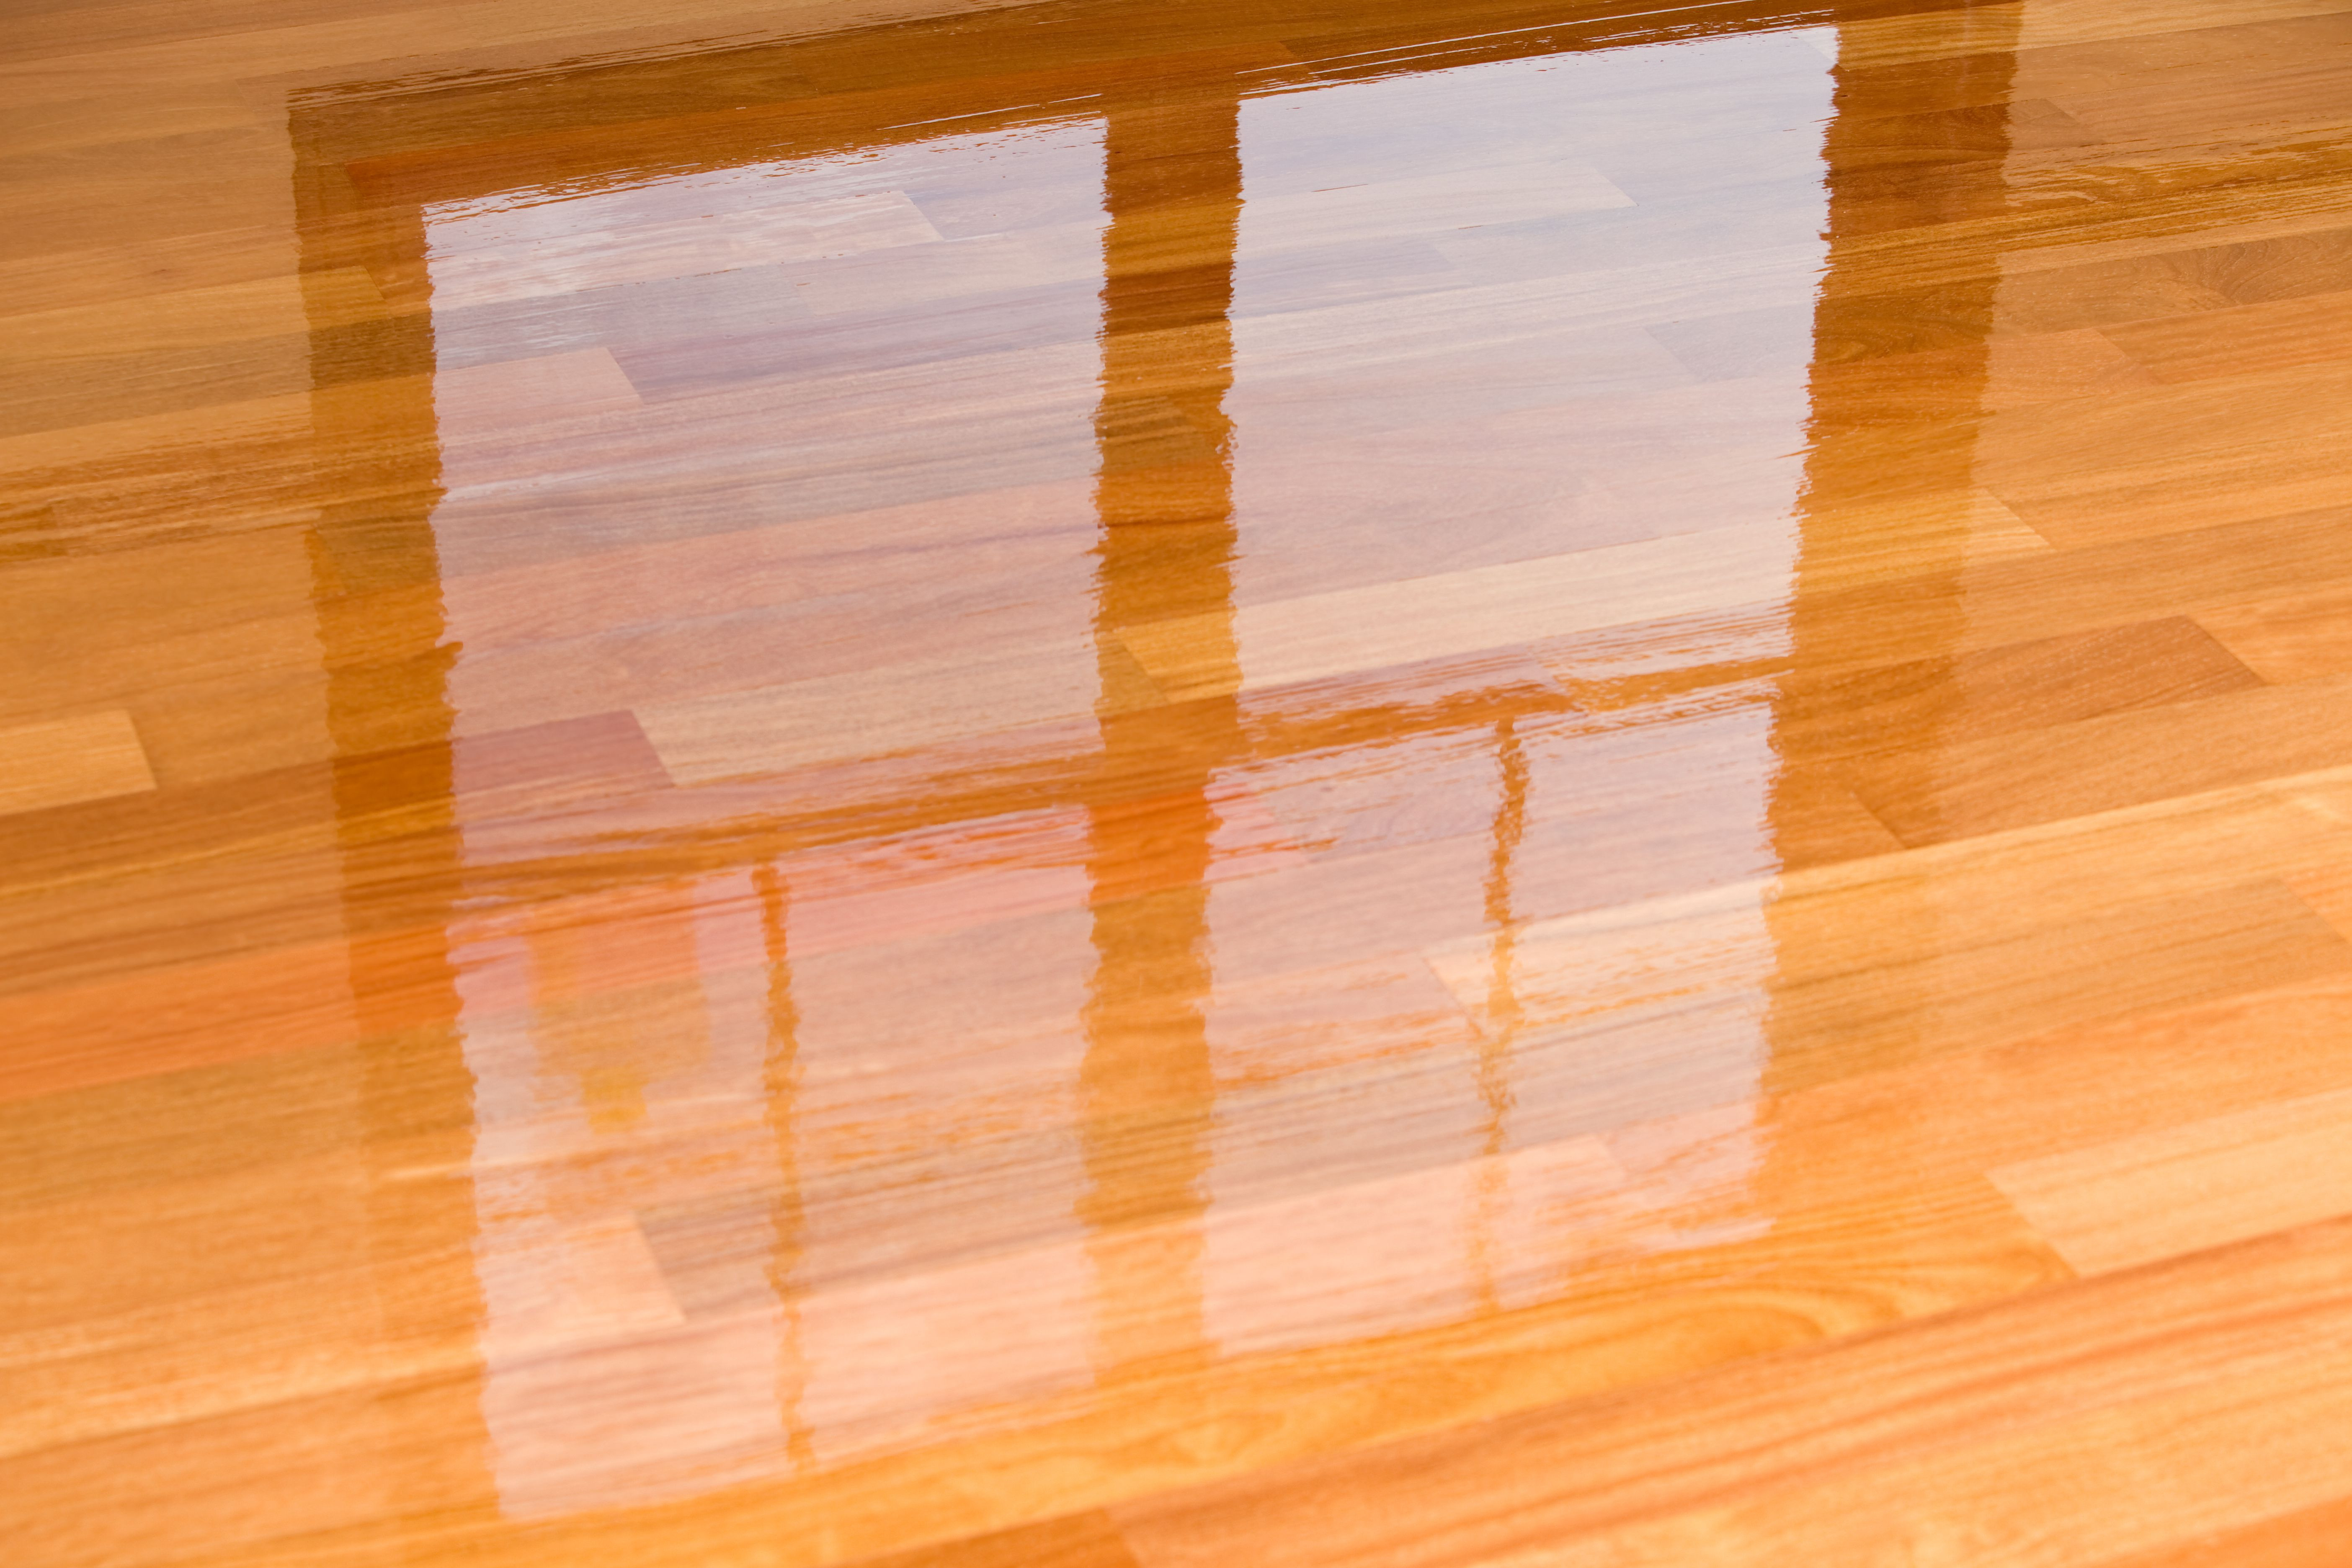 Hardwood Floors Direction Of Planks Of Guide to Laminate Flooring Water and Damage Repair Regarding Wet Polyurethane On New Hardwood Floor with Window Reflection 183846705 582e34da3df78c6f6a403968